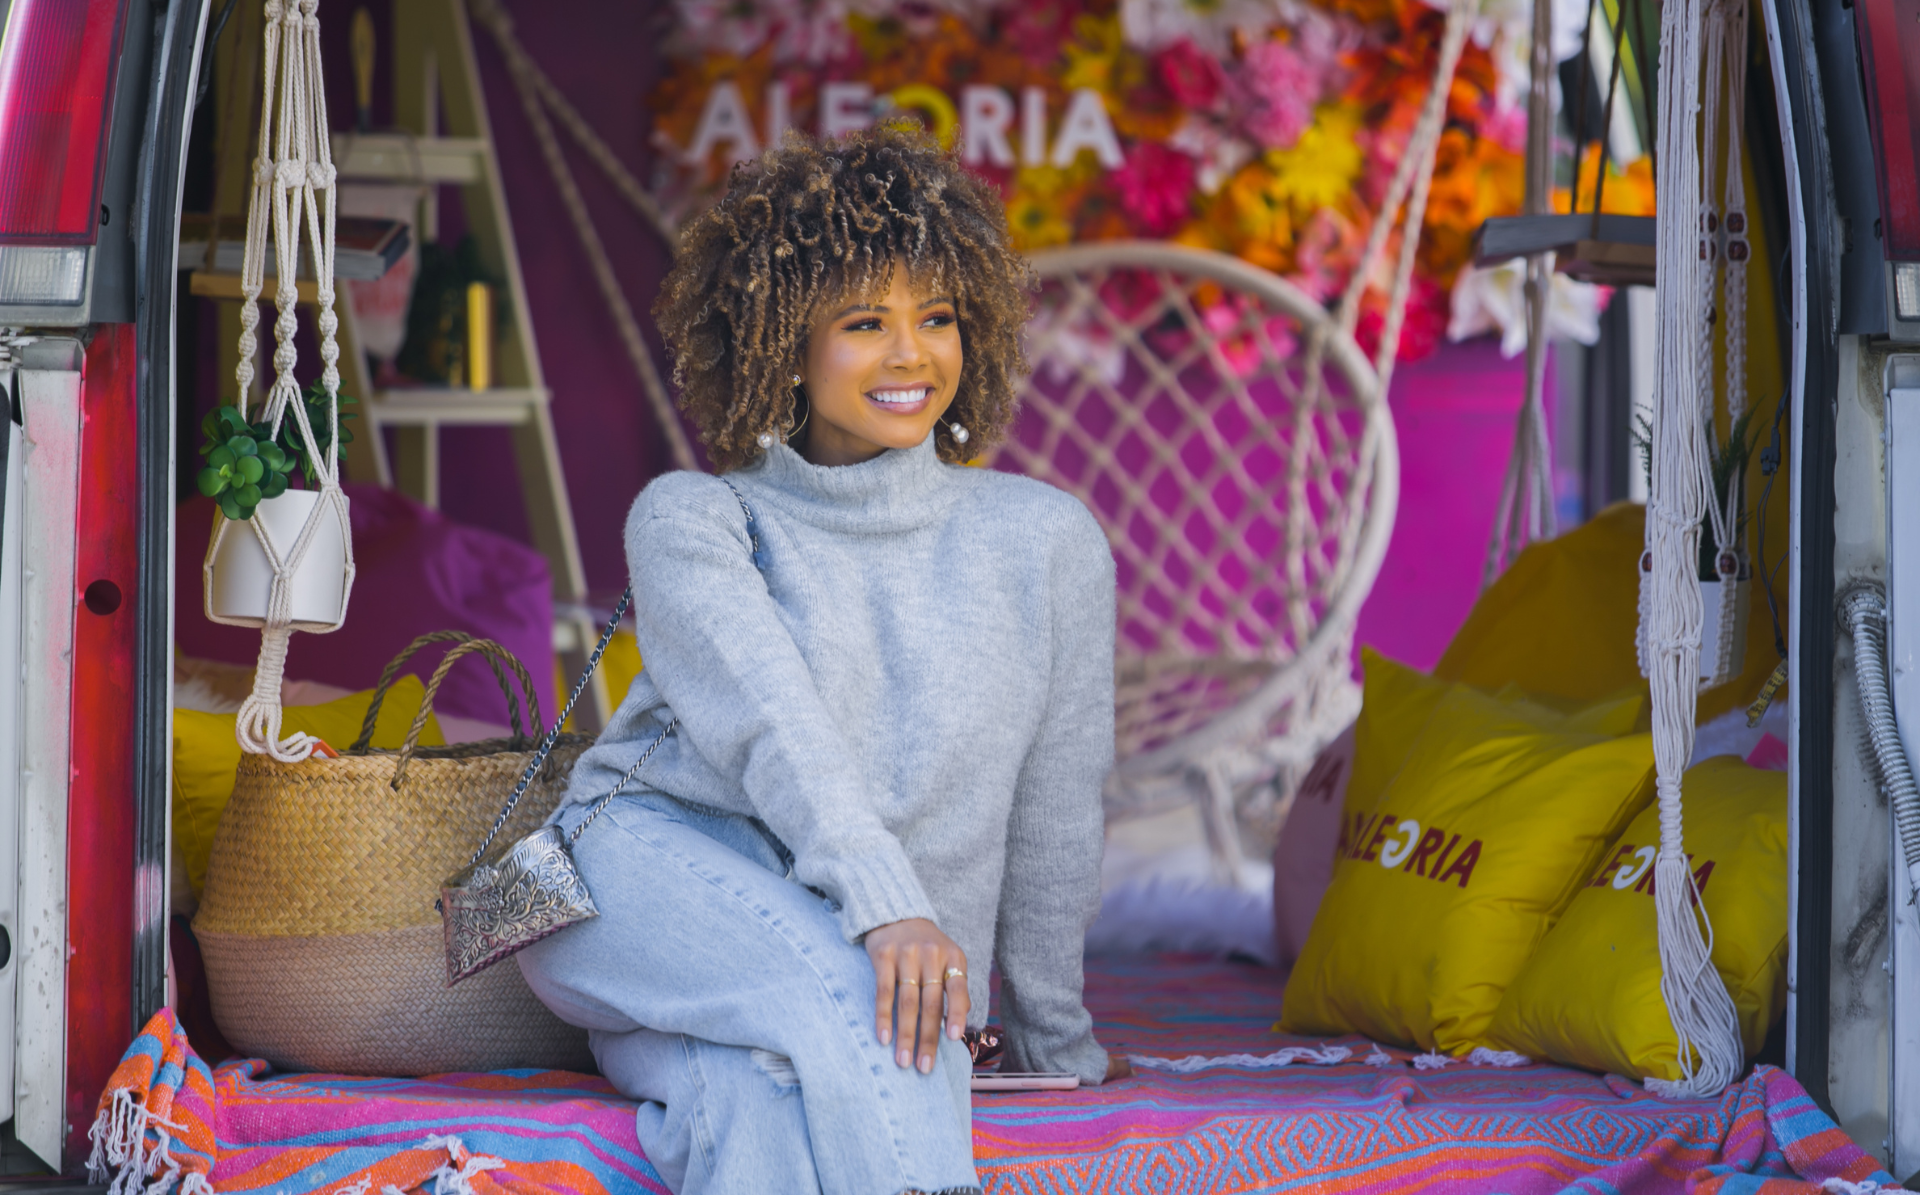 Pictured is a light skinned Afro-Latina woman sitting on an Alegria Publishing bus smiling away from the camera. She is wearing a grey turtleneck, and light denim pants. She has light brown and blonde hair in an afro.